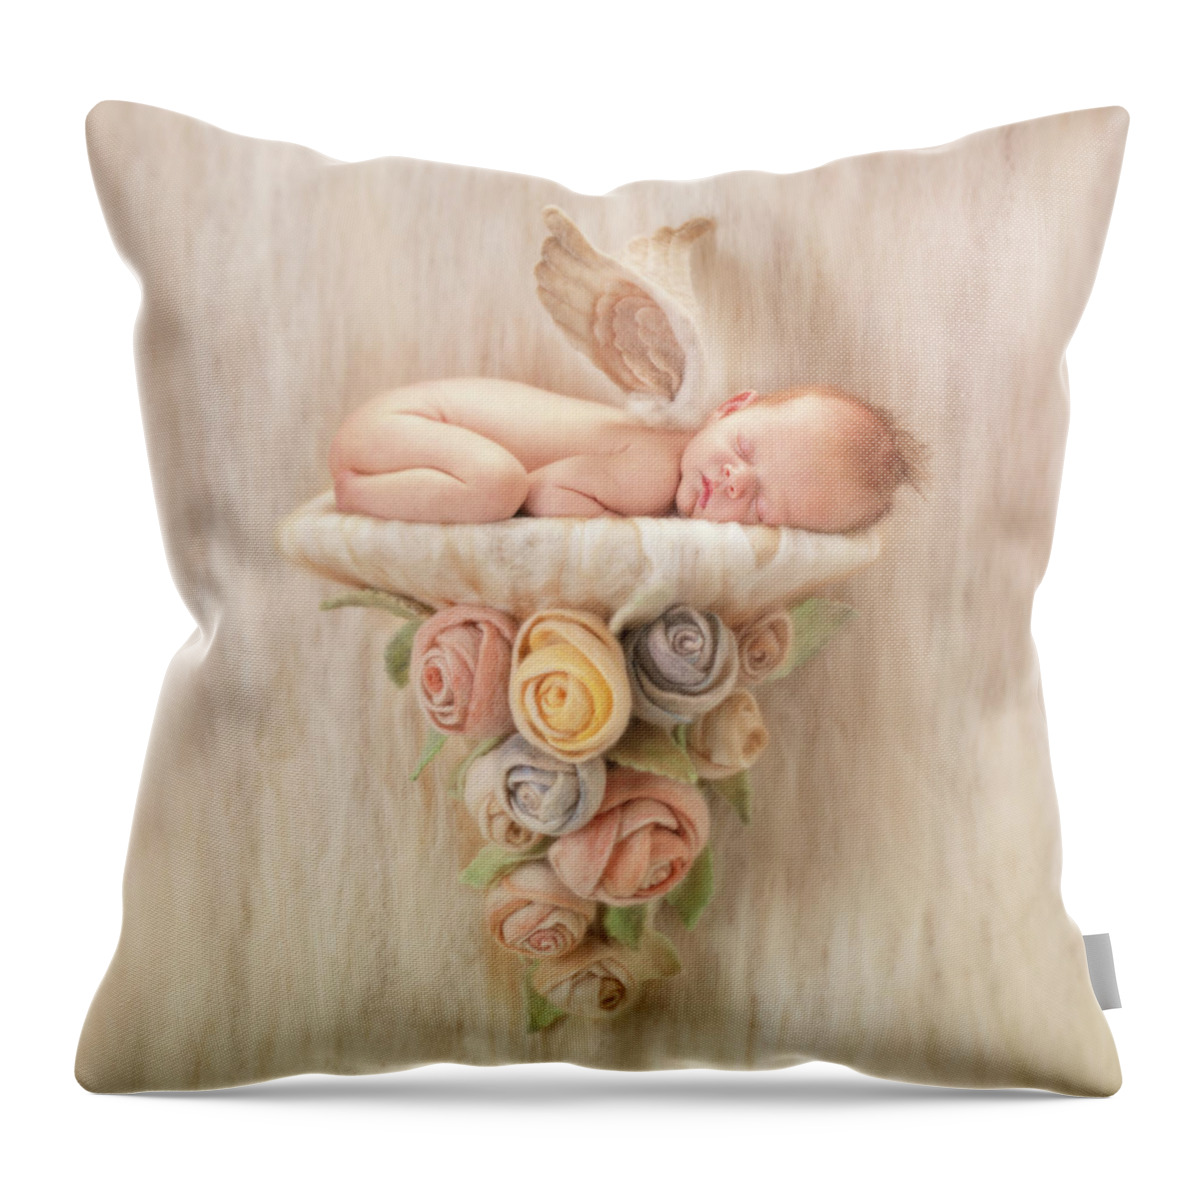 Angel Throw Pillow featuring the photograph Newborn Angel with Roses by Anne Geddes